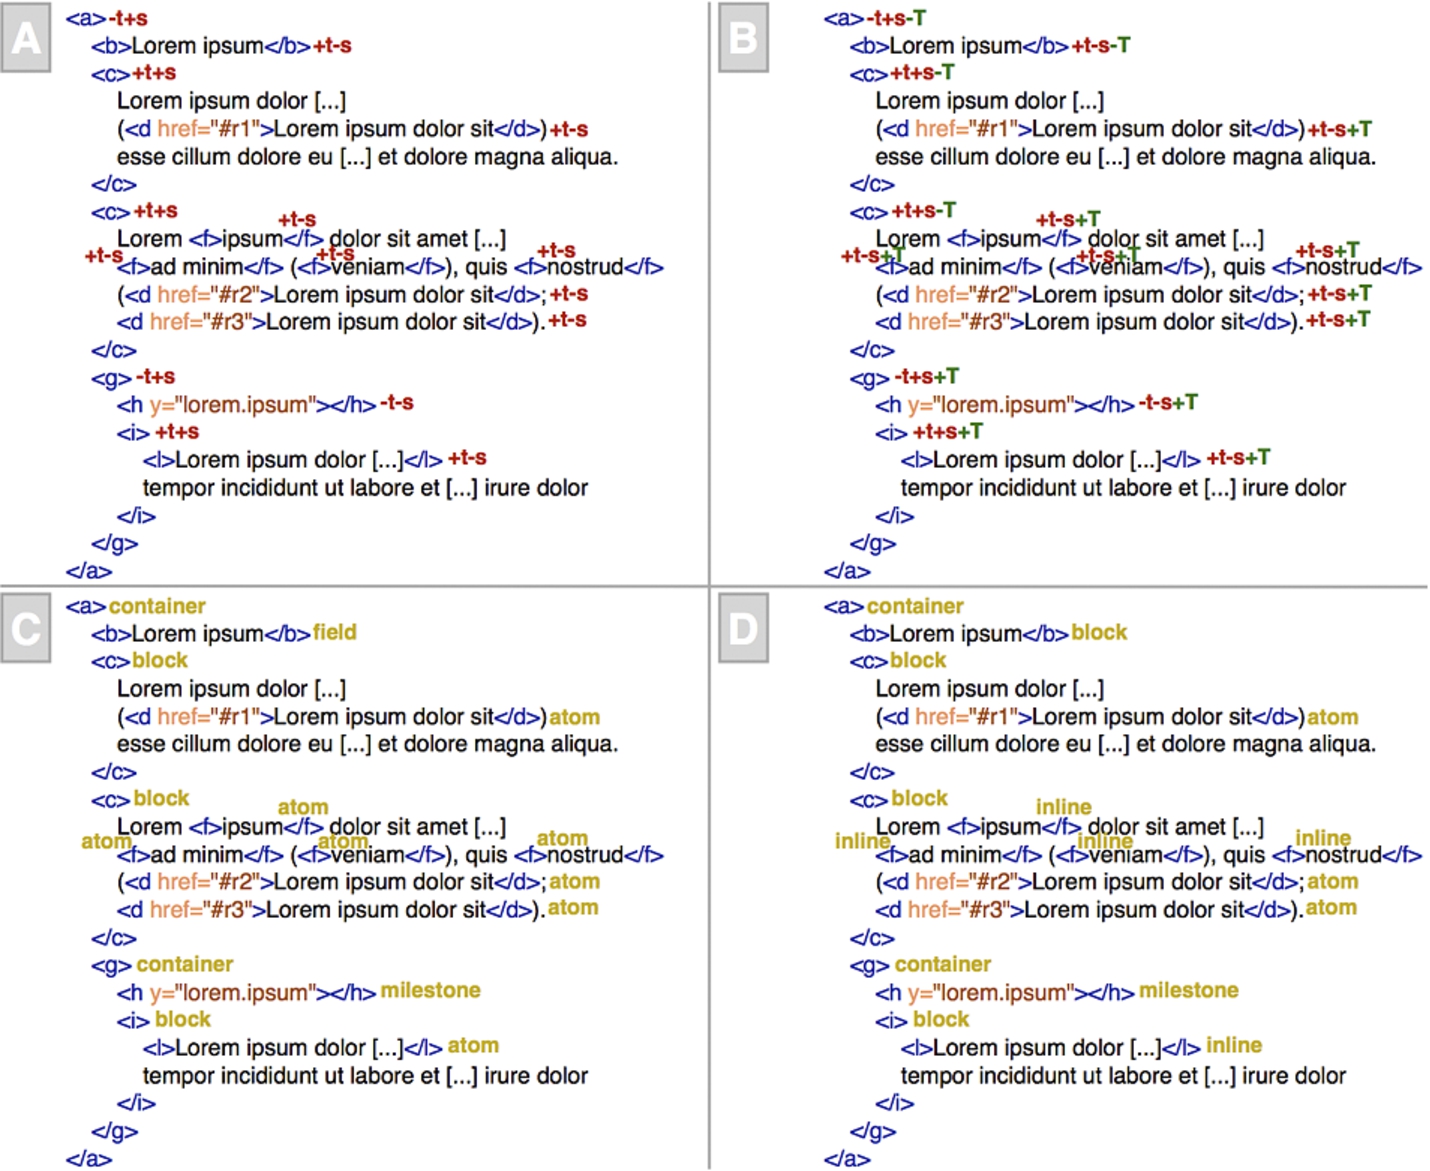 Four snapshots of the same excerpt of an XML document, describing the execution of the algorithm introduced in Fig. 4.